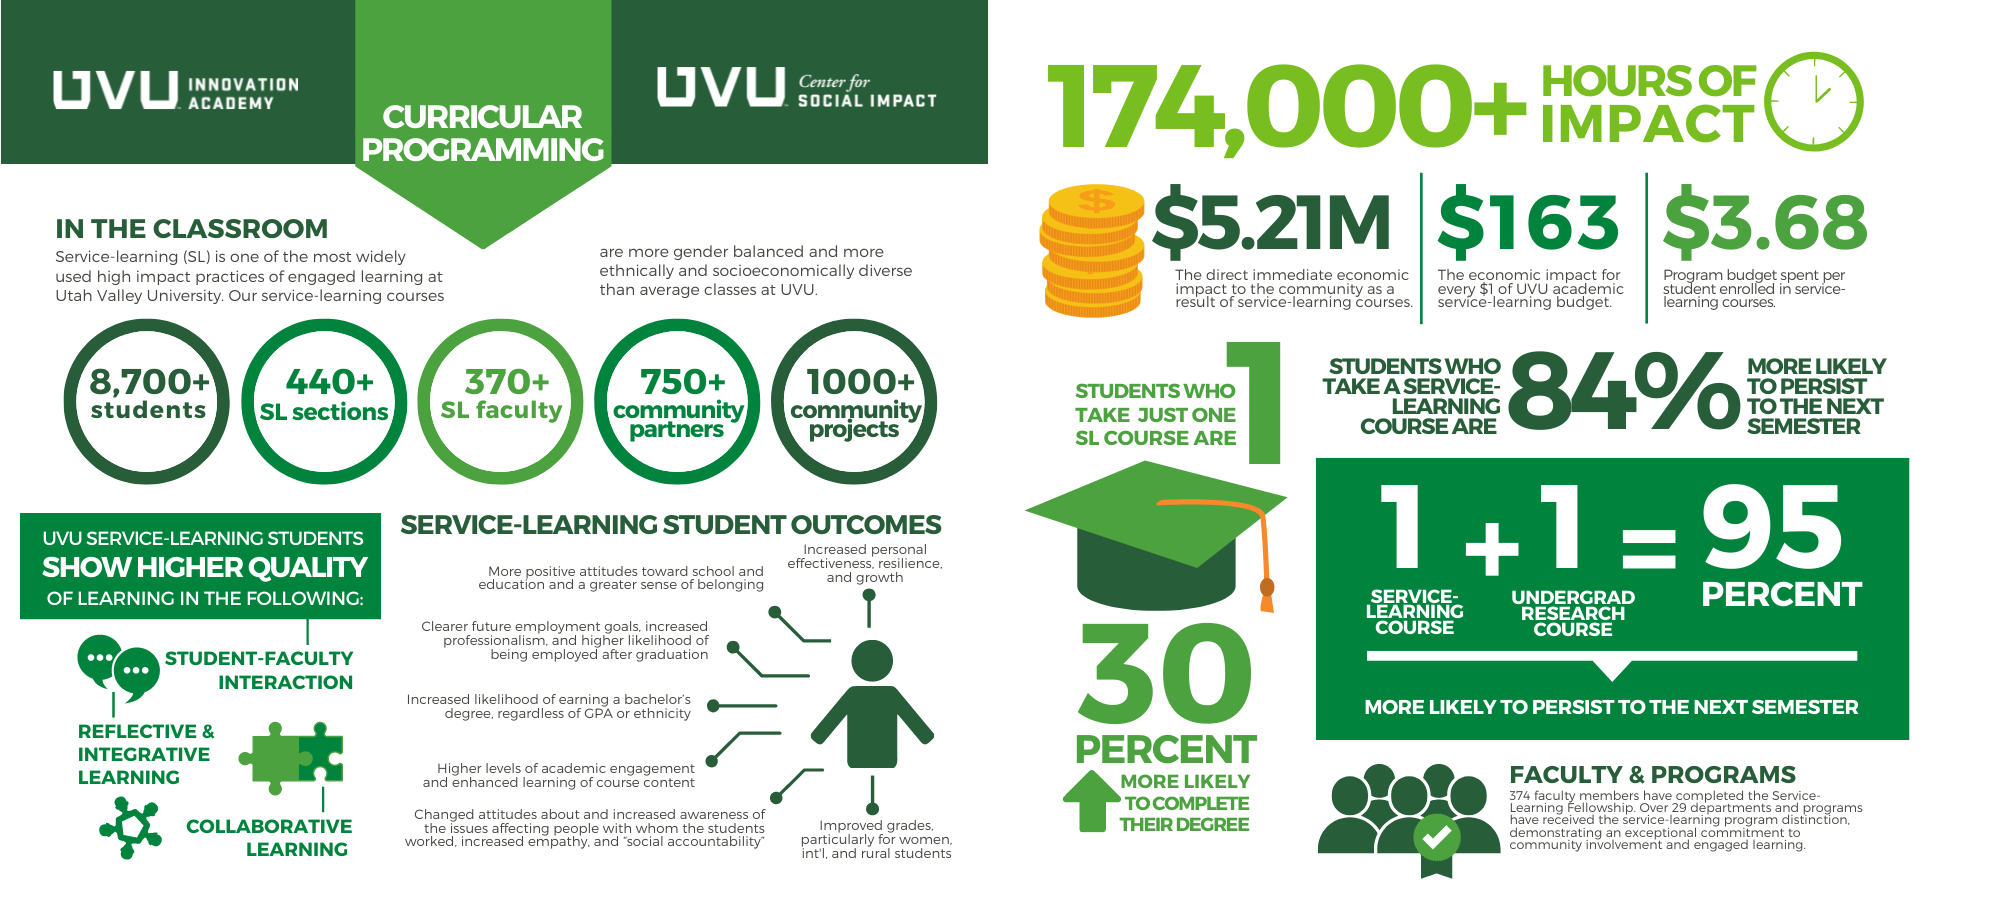 Service-Learning is a joint curriculum program of the UVU Innovation Academy and the Center for Social Impact. In the classroom, service-learning is one of the most widely used high impact practices of engaged learning at Utah Valley University. Our service-learning courses are more gender balanced and ethnically and socioeconomically diverse than average classes at UVU. During the 2021-2022, service-learning classroom statistics included: over 8,700 students enrolled, over 440 service-learning sections, over 370 service-learning faculty, over 750 community partners, and over 1000 community projects.  UVU service-learning students show higher quality of learning in the following areas: Student-Faculty interaction; Reflective and integrative learning; Collaborative learning.   Service-learning student outcomes include increased personal effectiveness, resilience and growth; more positive attitudes toward school and education and a greater sense of belonging; clearer future employment goals, increased professionalism and higher likelihood of being employed after graduation; increased likelihood of earning a bachelor’s degree, regardless of GPA or ethnicity; higher levels of academic engagement and enhanced learning of course content; changed attitudes about and increased awareness of the issues affecting people with whom the students worked, increased empathy and “social accountability”; and improved grades, particularly for women, international and rural students.  During the 2020-2021 academic year, service-learning courses generated over 174,000 hours of impact. This translates to the equivalent of $5,210,000 in direct immediate economic impact to the community as a result of service-learning courses; $163 in economic impact for every $1 of UVU academic service-learning budget; and $3.68 program budget spent per student enrolled in service-learning courses.   Students who take just one service-learning course are 30% more likely to complete their degree. Students who take a service-learning course are 84% more likely to persist to the next semester. Students who take one service-learning course and one undergrad research course are 95% more likely to persist to the next semester. Three hundred and seventy-four faculty members have completed the service-learning fellowship. Over twenty-nine departments and programs have received the service-learning program distinction, demonstrating an exceptional commitment to community involvement and engaged learning.